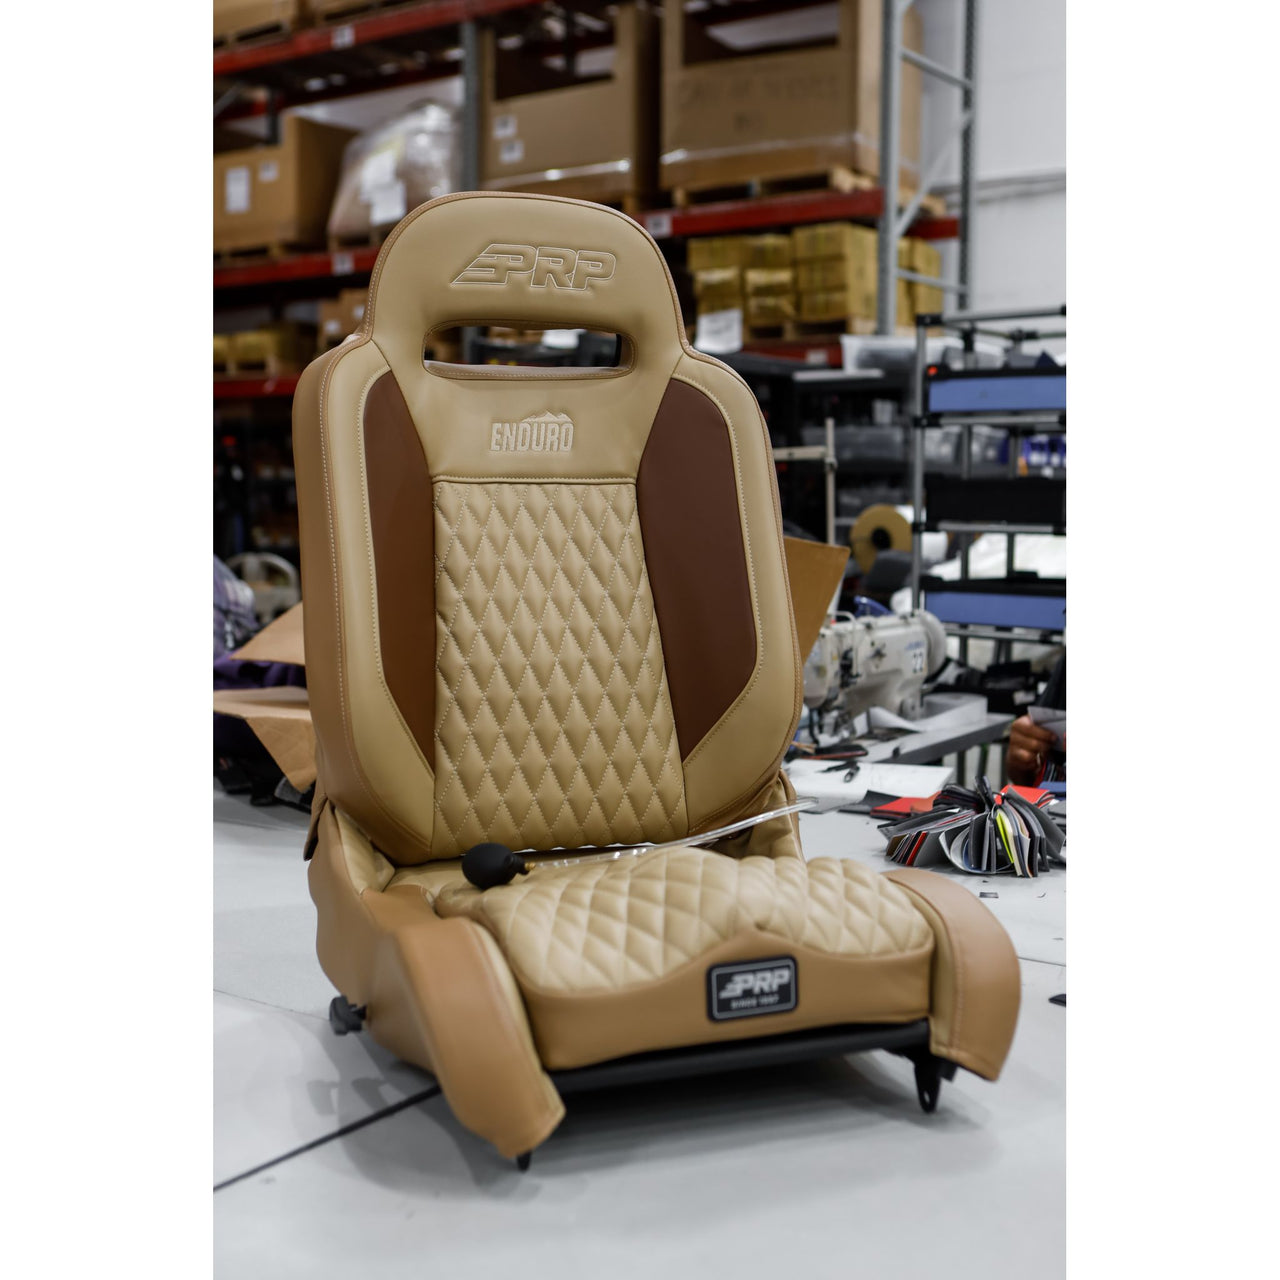 PRP Enduro Elite Reclining 2 In. Extra Tall / Extra Wide Suspension Seat (Driver Side)